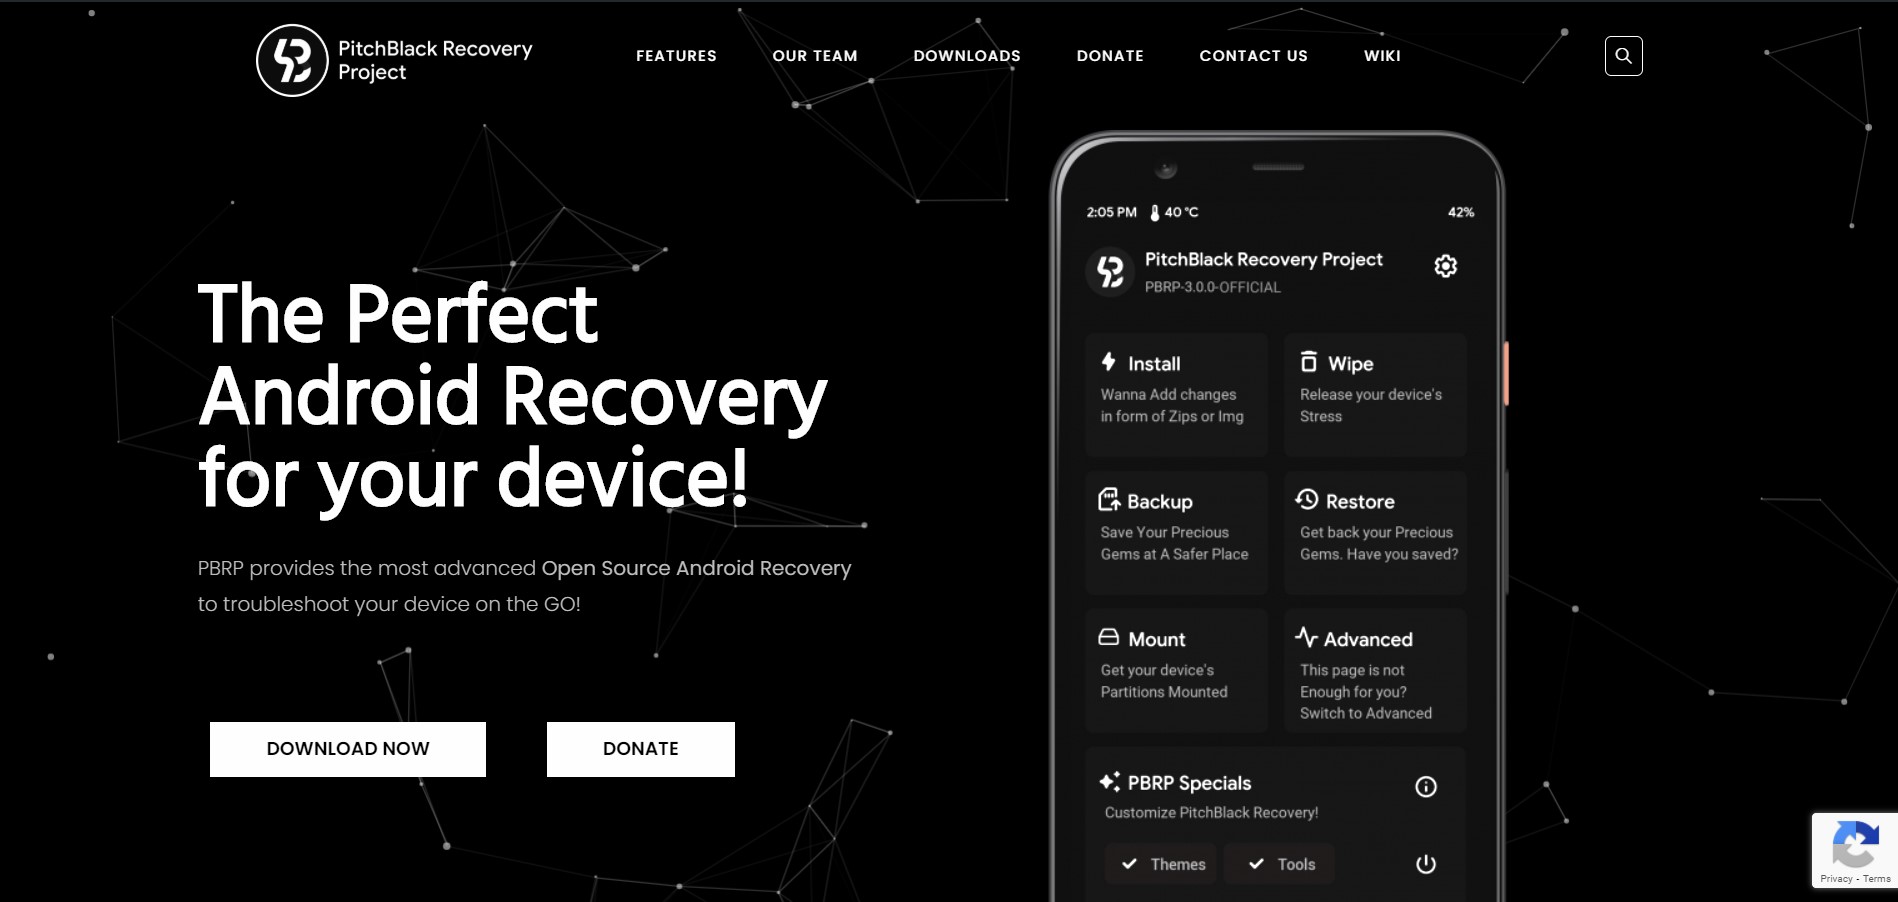 PitchBlack Recovery Project Website